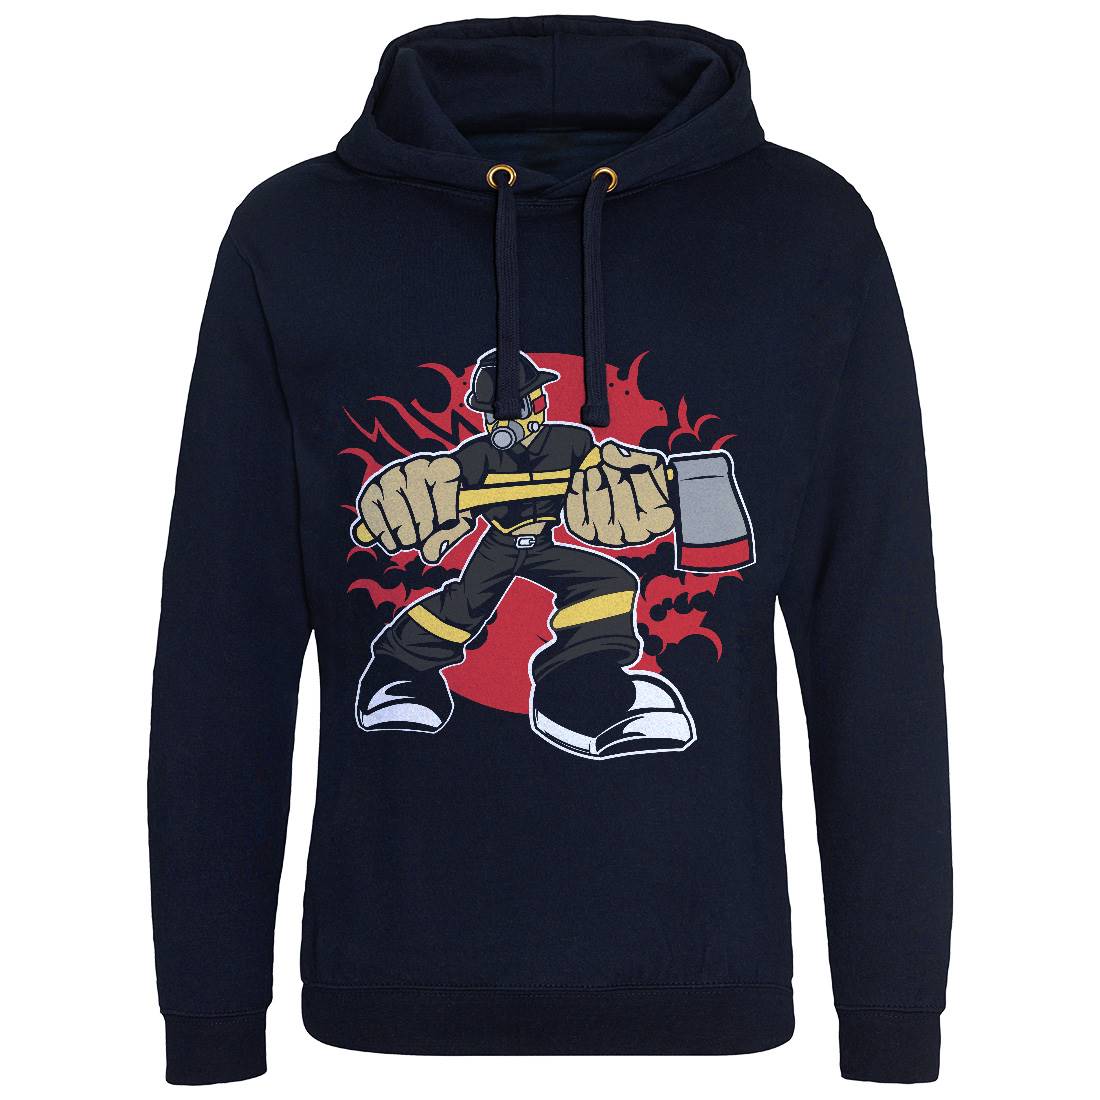 Fireman Mens Hoodie Without Pocket Firefighters C359